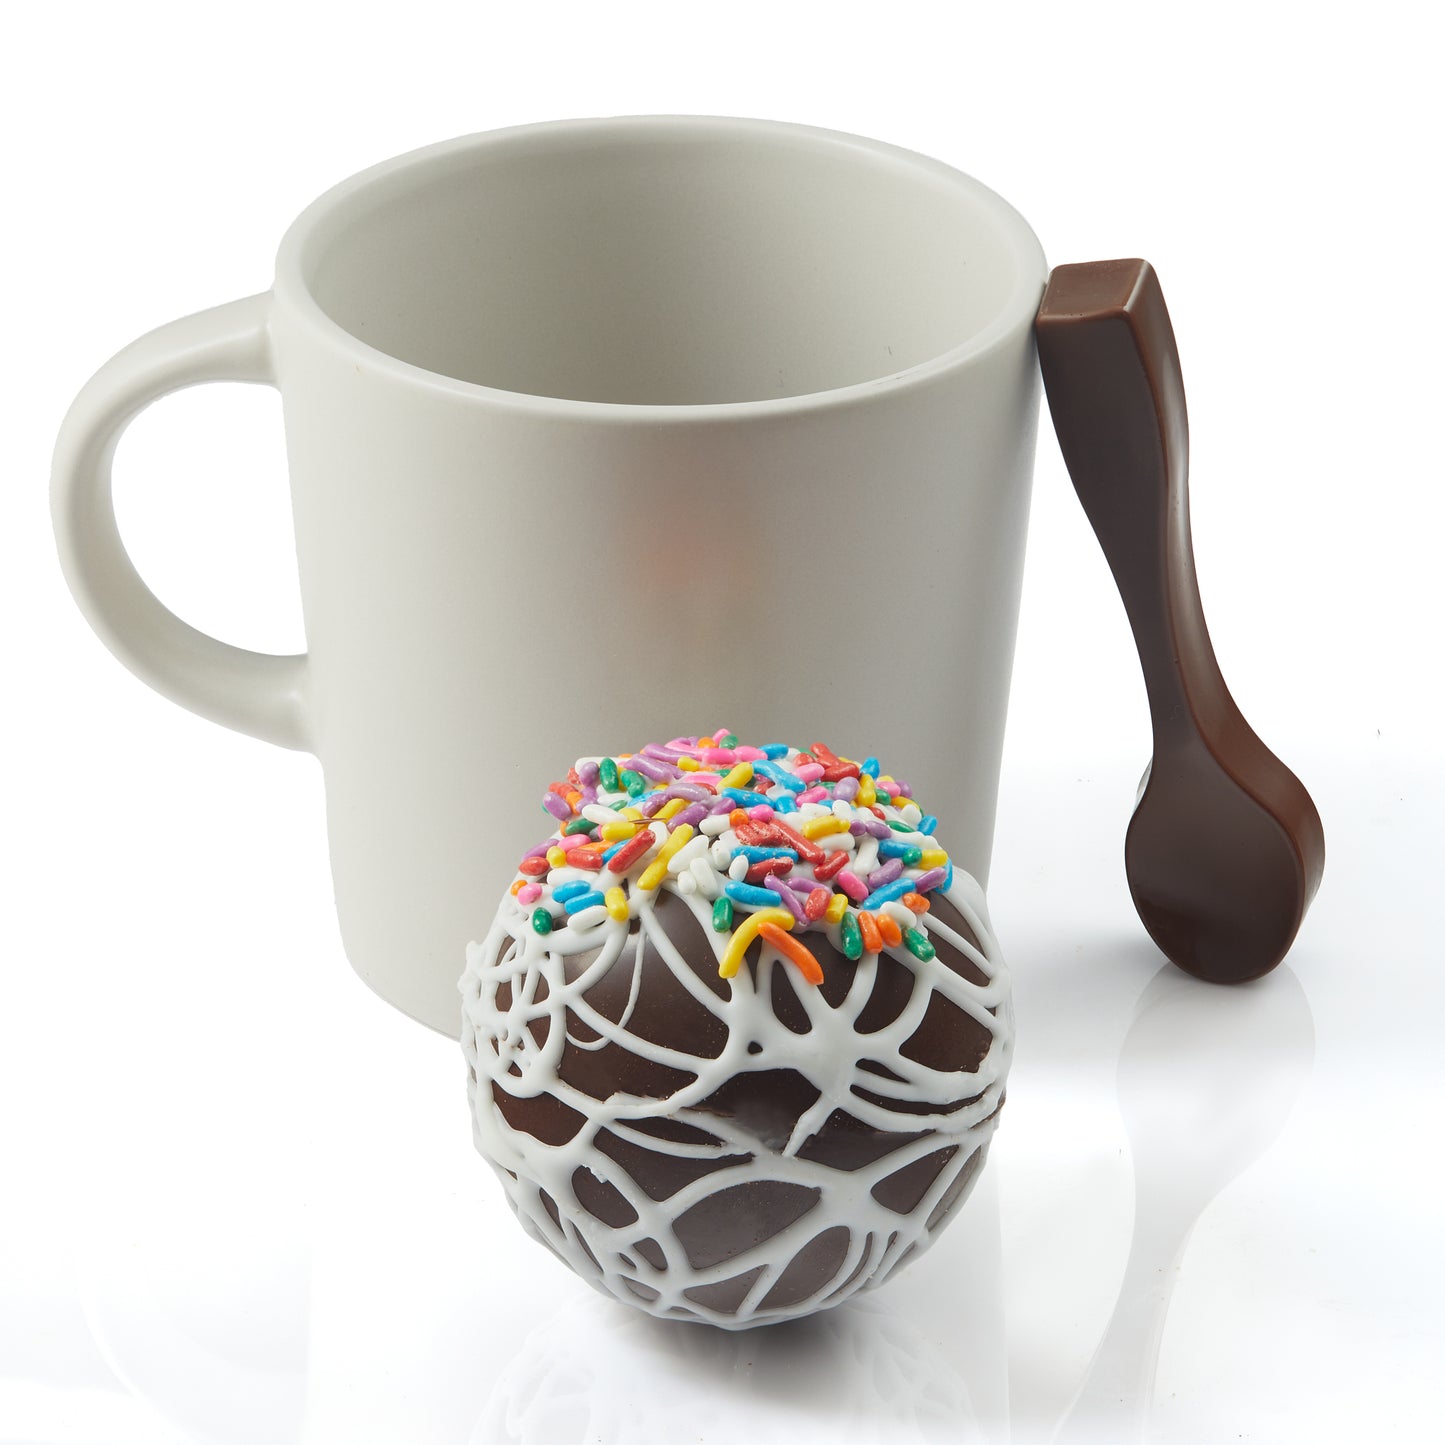 Sprinkle Cocoa Bomb Gifts